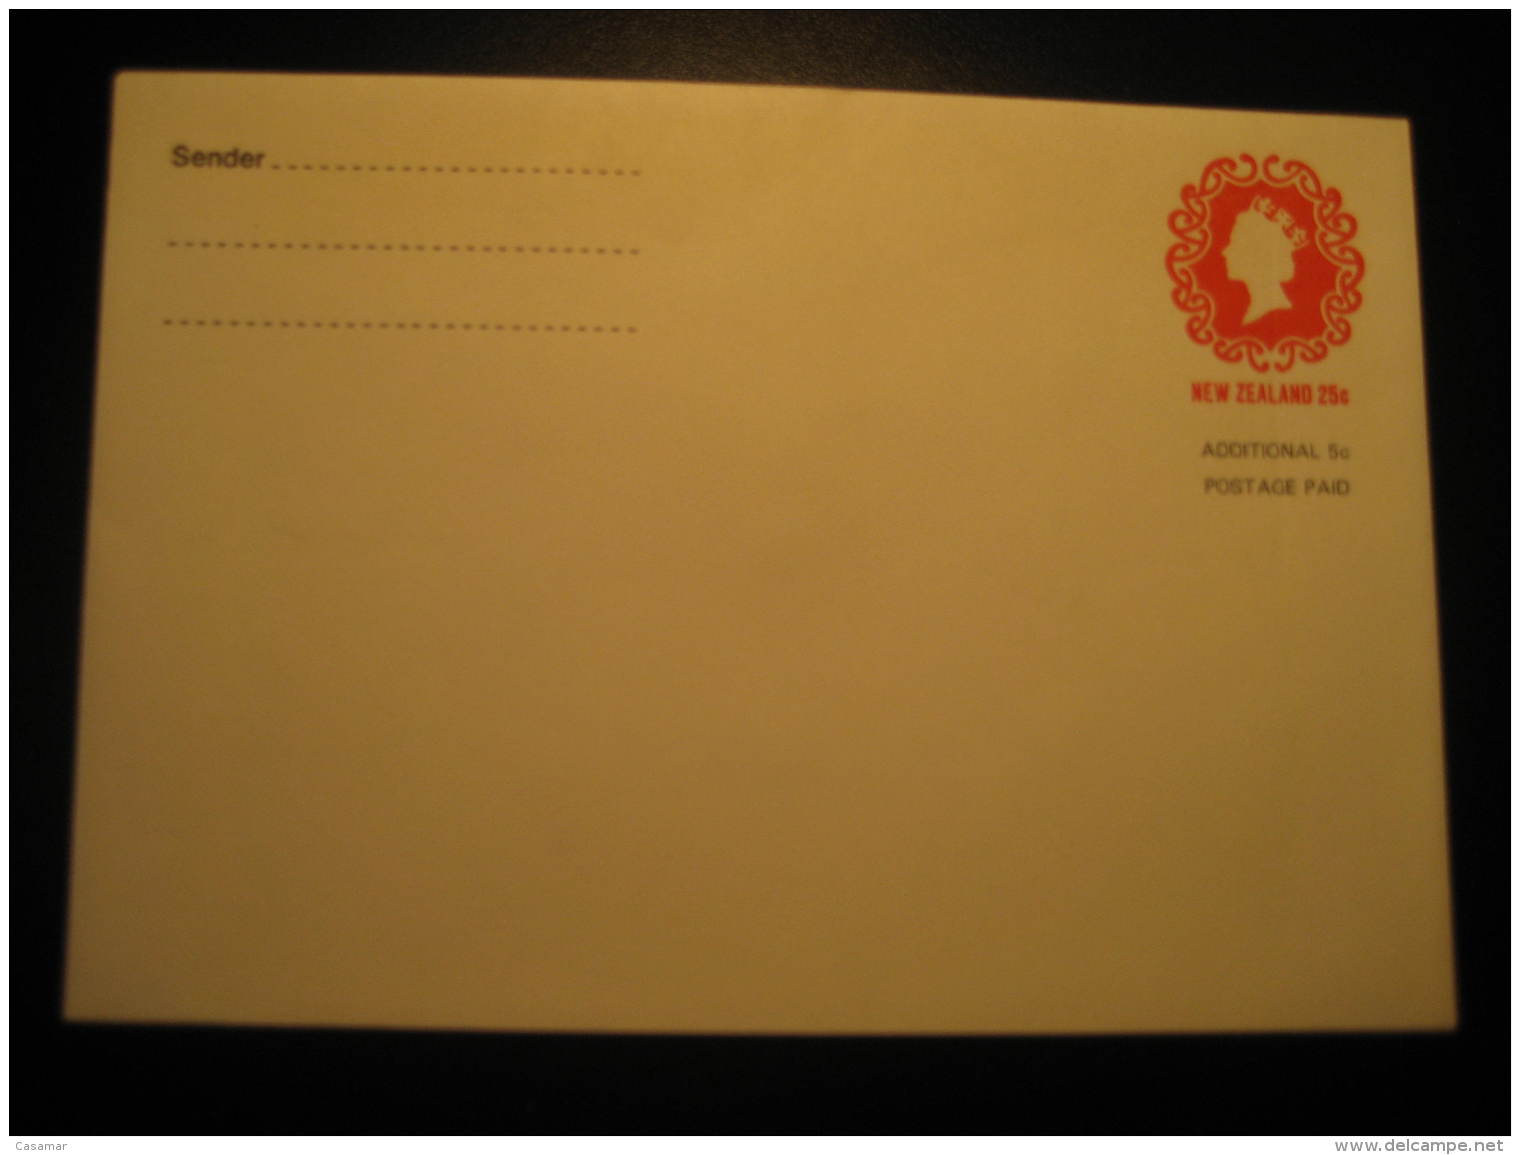 25c Additional 5c Postage Paid Postal Stationery Cover New Zealand - Postal Stationery